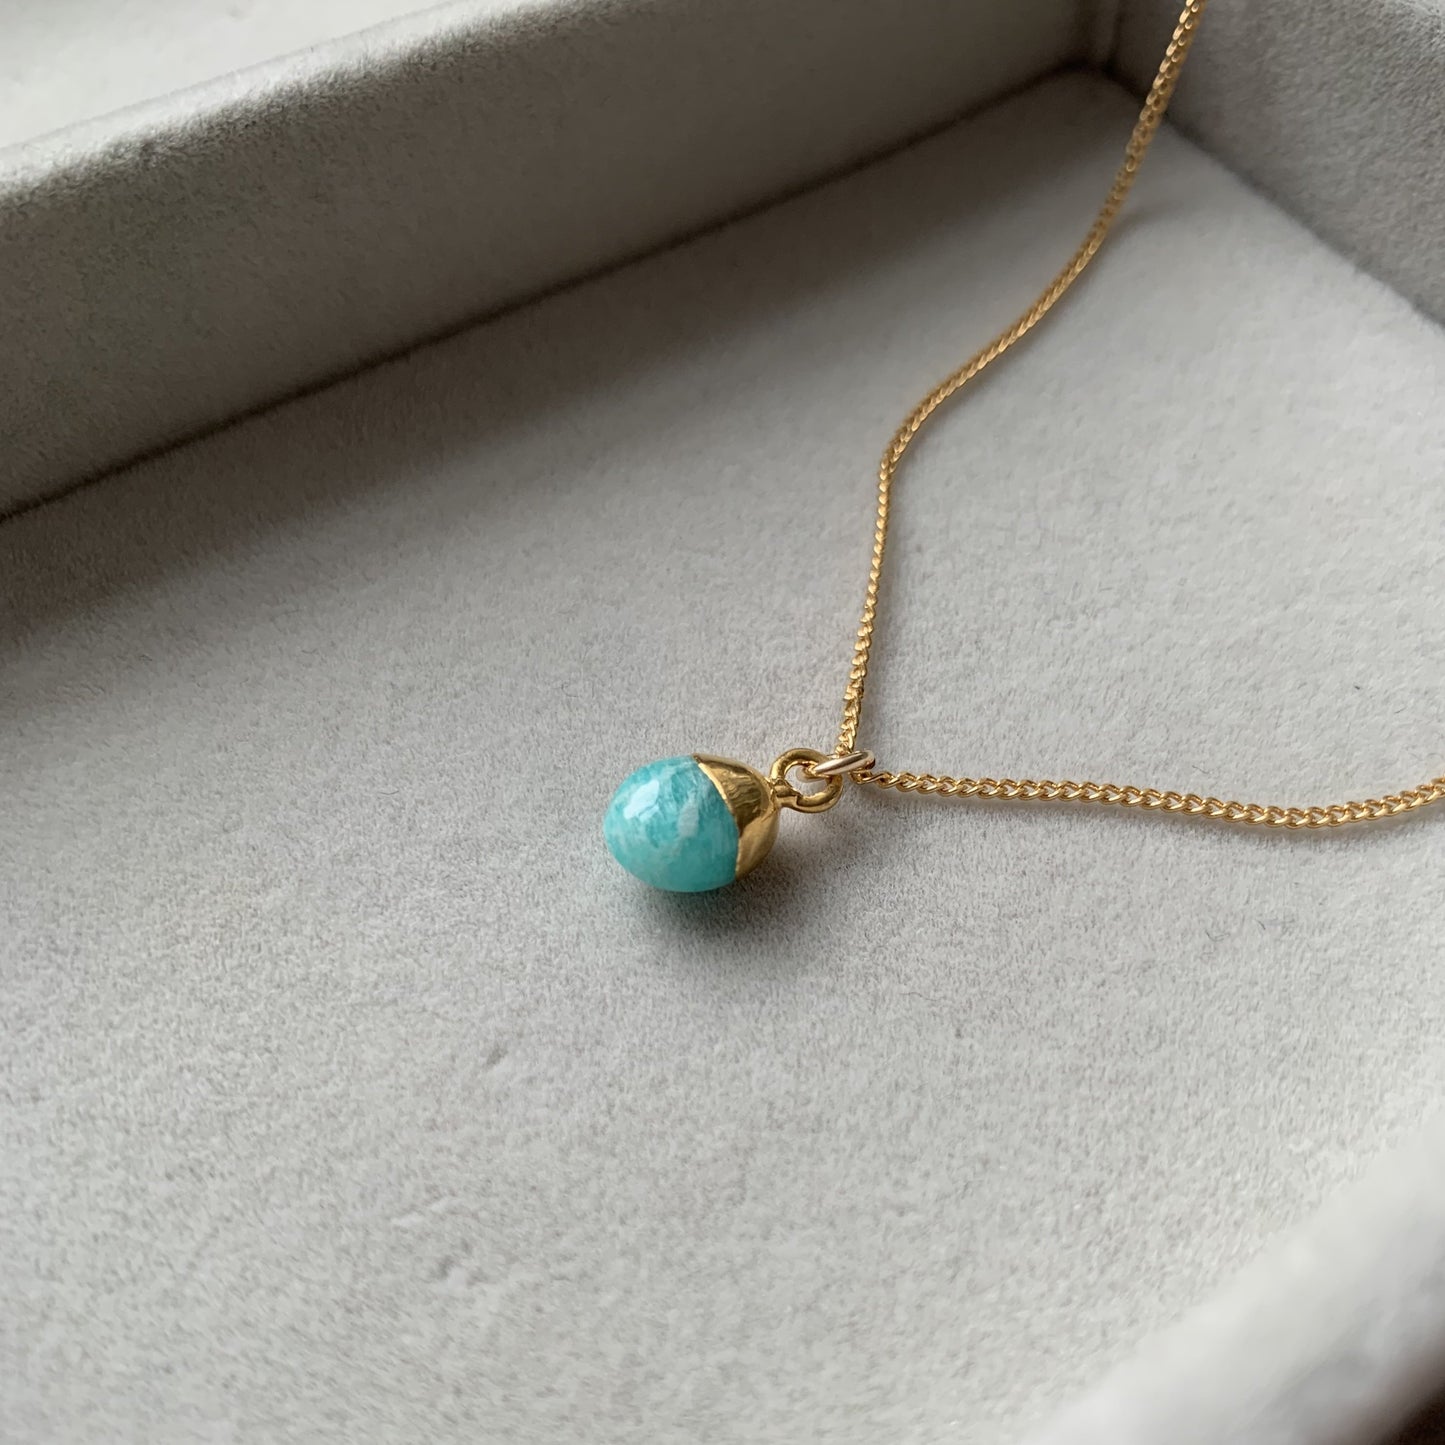 Load image into Gallery viewer, Tiny Tumbled Gemstone Necklace - Amazonite (Confidence) - Decadorn
